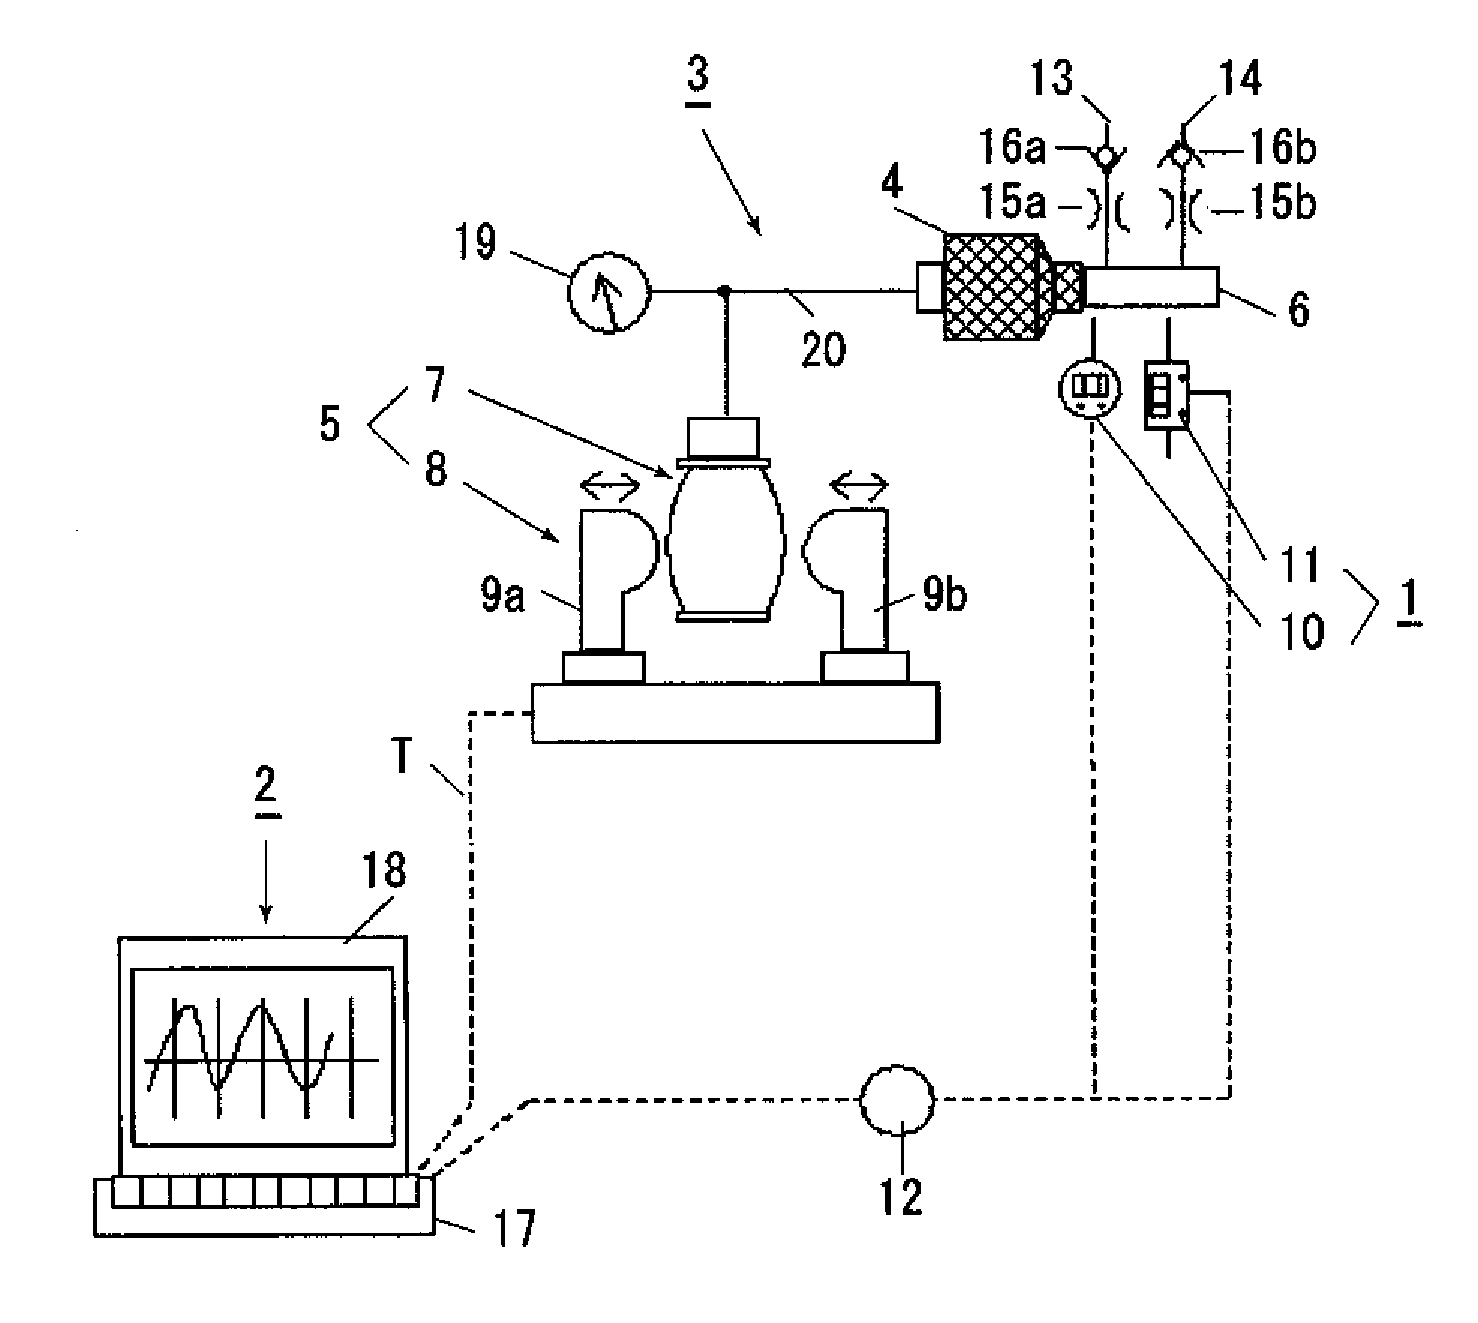 Test substance administration system for animal experiment